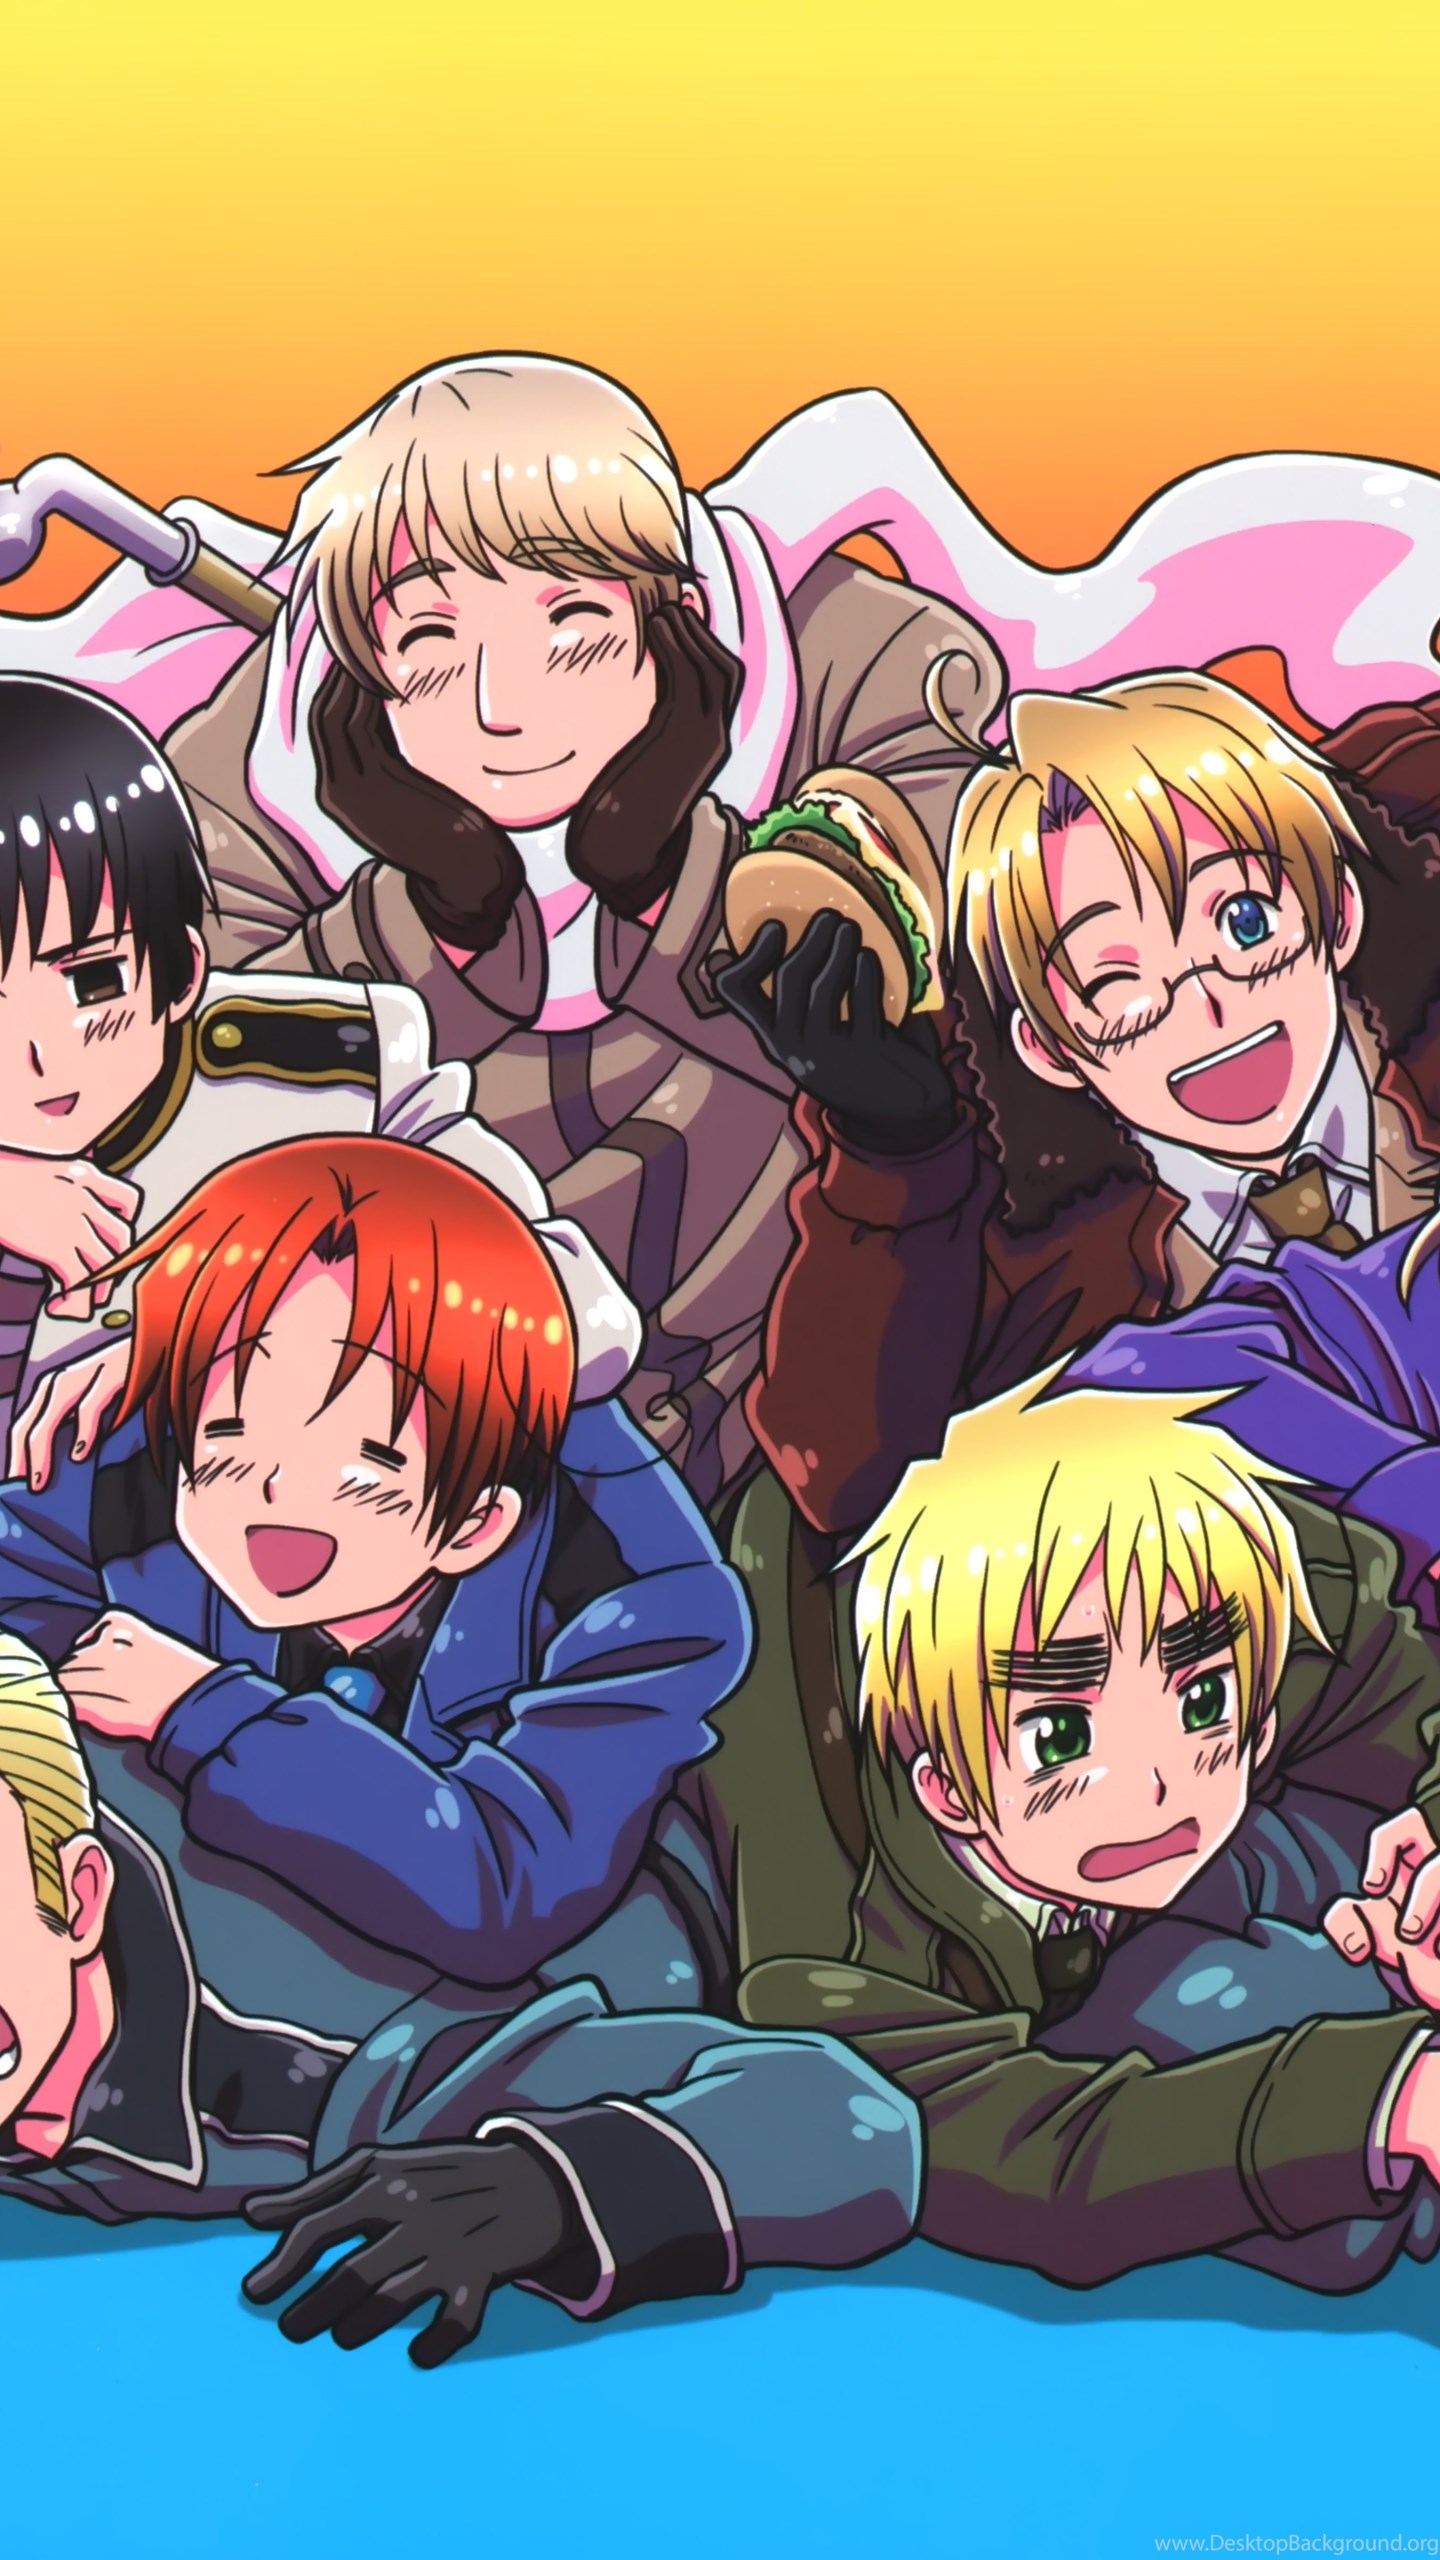 Download Axis Powers: Hetalia/ Mobile, Android, Tablet QHD, Samsung S6, S7,...